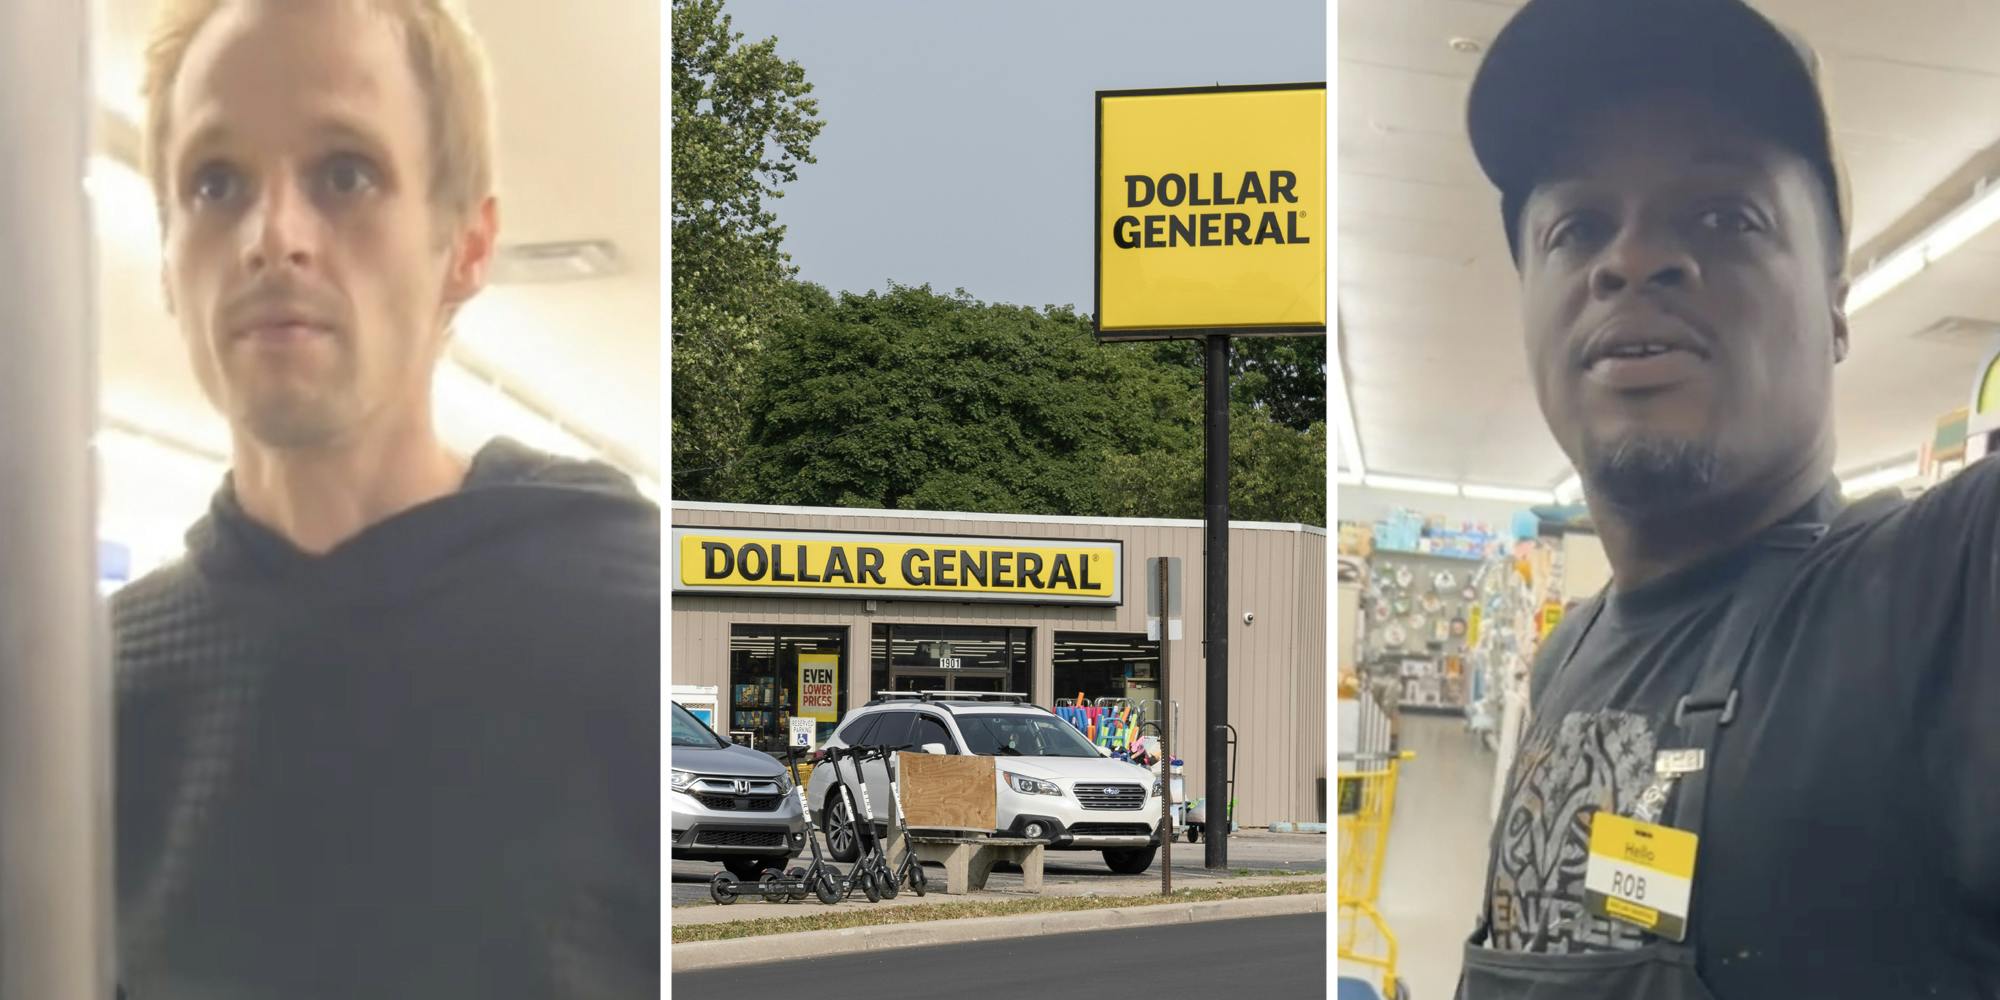 ‘And my sister works for corporate’: Shopper catches Dollar General worker closing store early so they can go home. She drove 25 minutes to get there